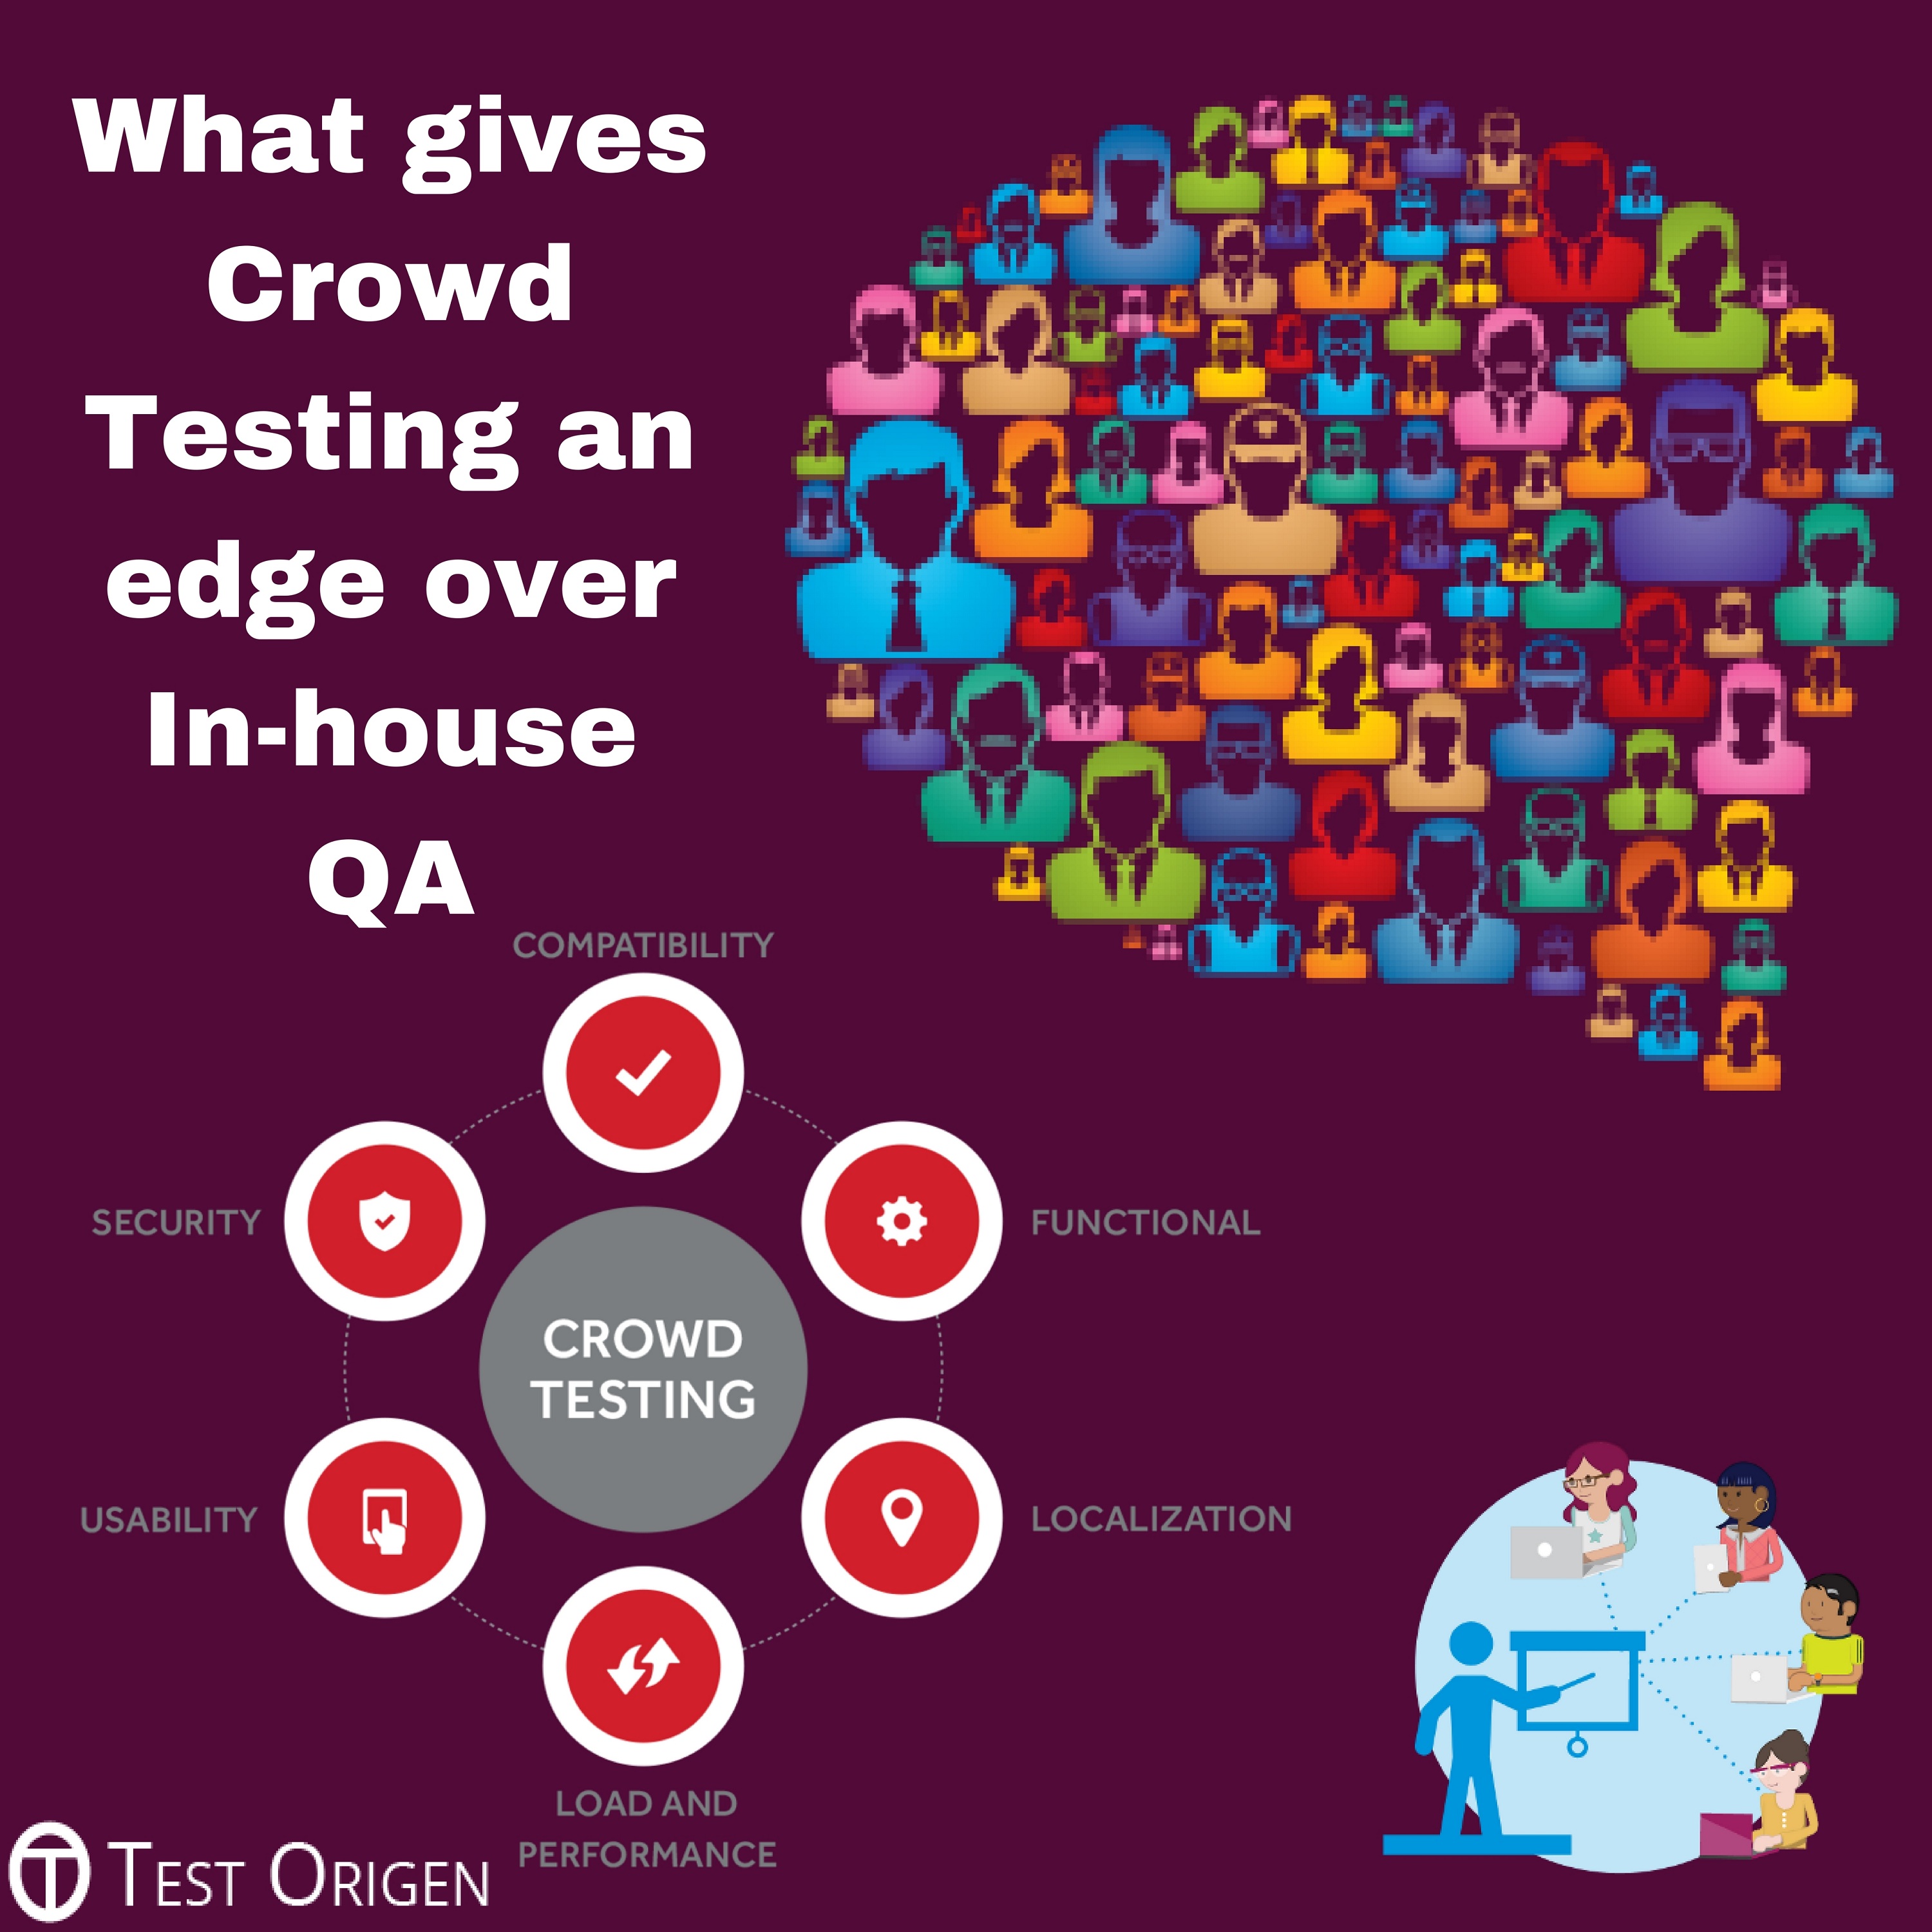 What gives Crowd Testing an edge over In-house QA